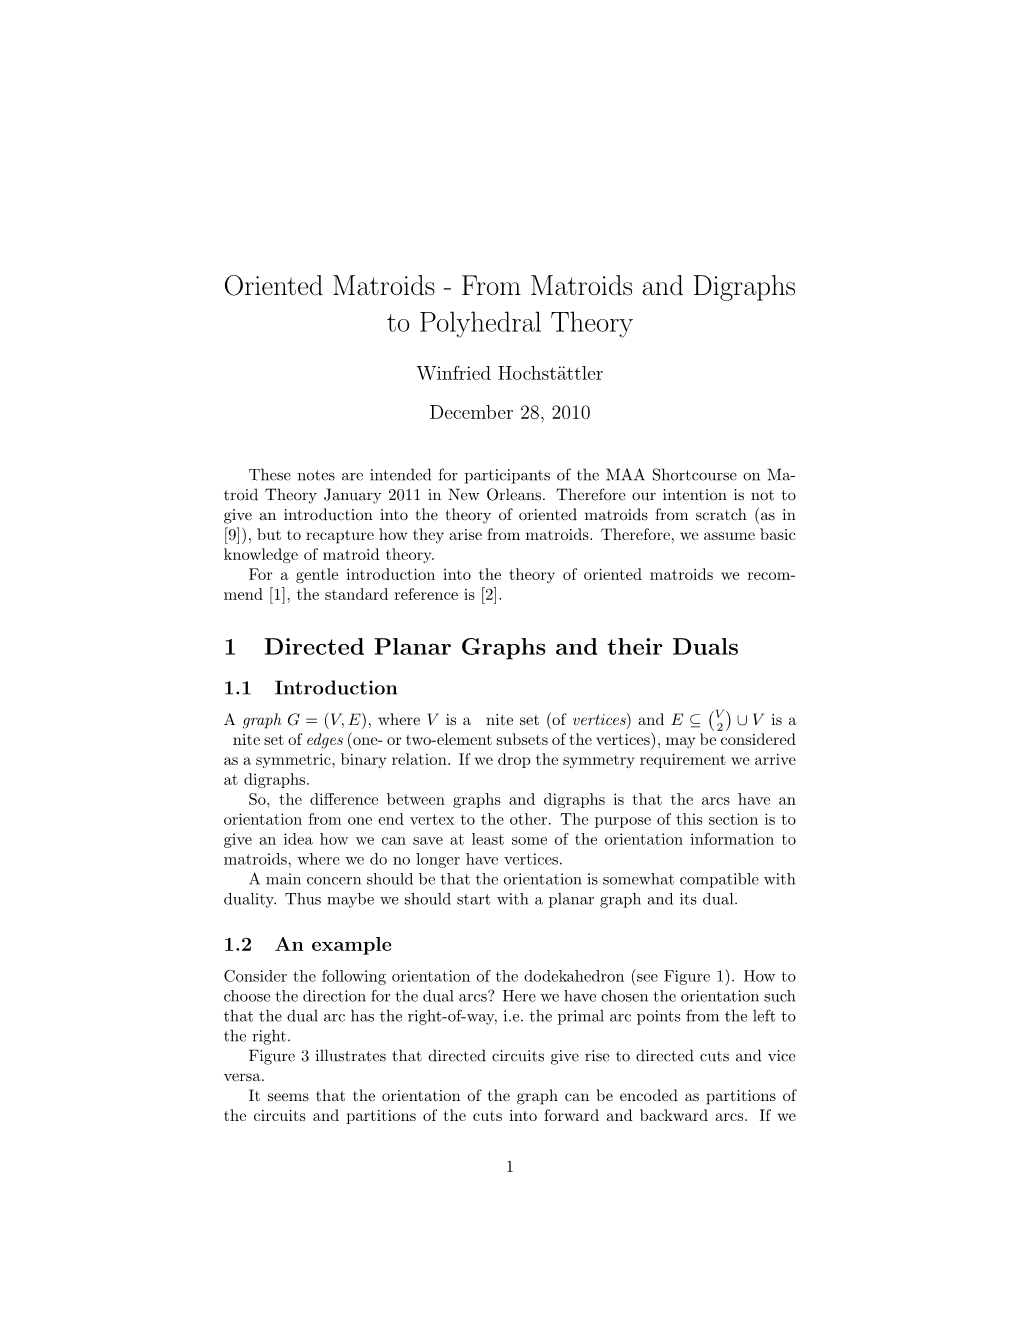 Oriented Matroids - from Matroids and Digraphs to Polyhedral Theory